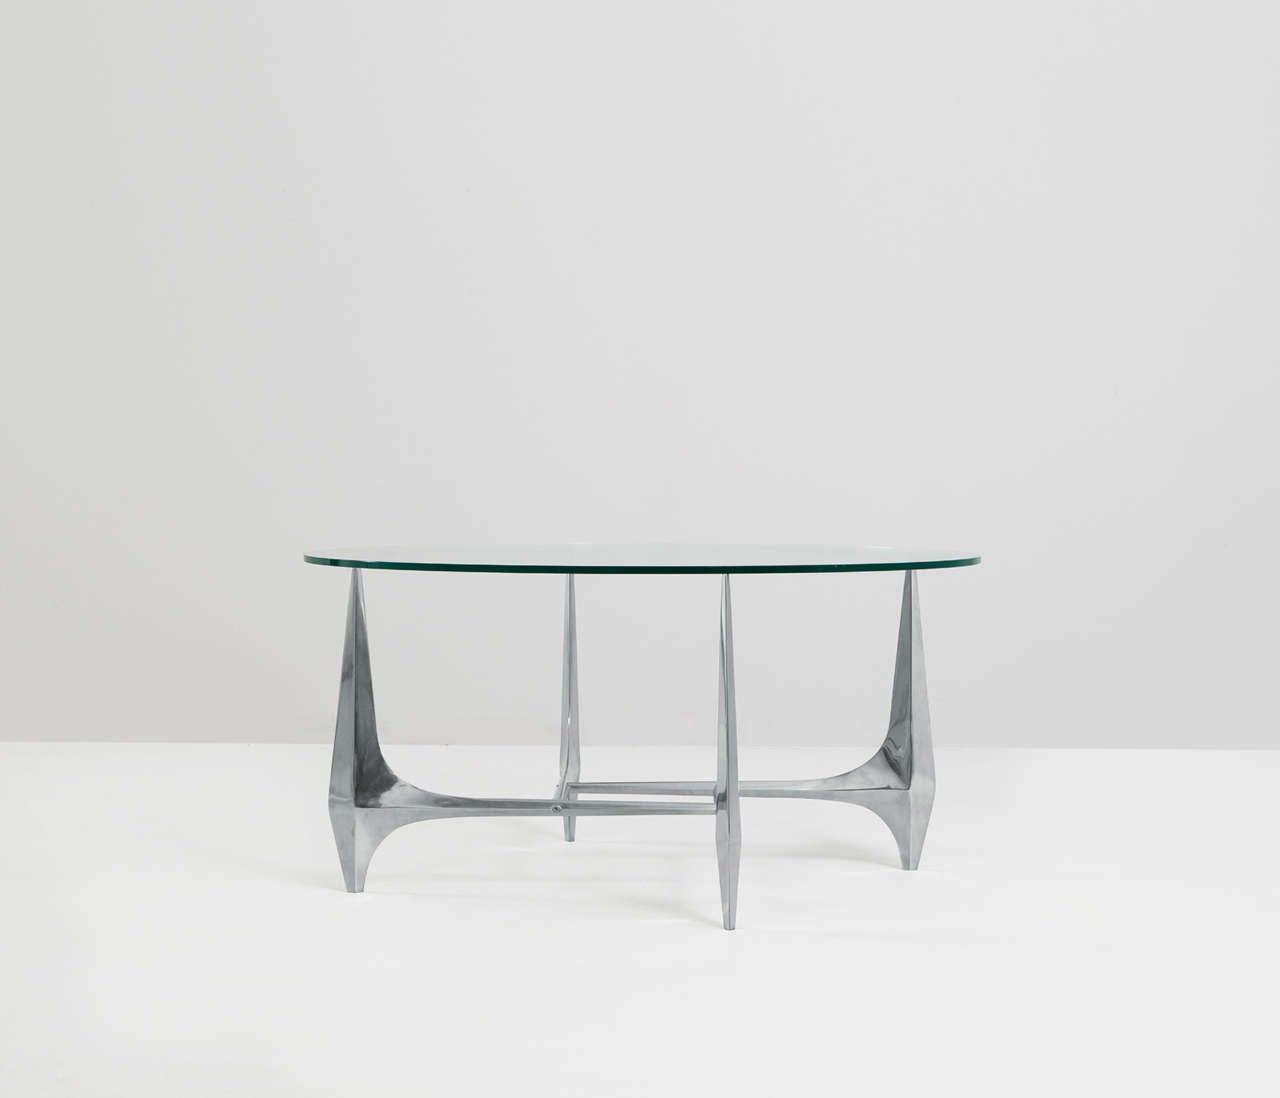 Sculptural cocktail table by Knut Hesterberg with aluminum legs and round glass top. Produced by Ronald Schmitt, Germany. The legs show sharp and edgy lines, which provide a very modern look.
Worldwide shipping possibilities: For competitive